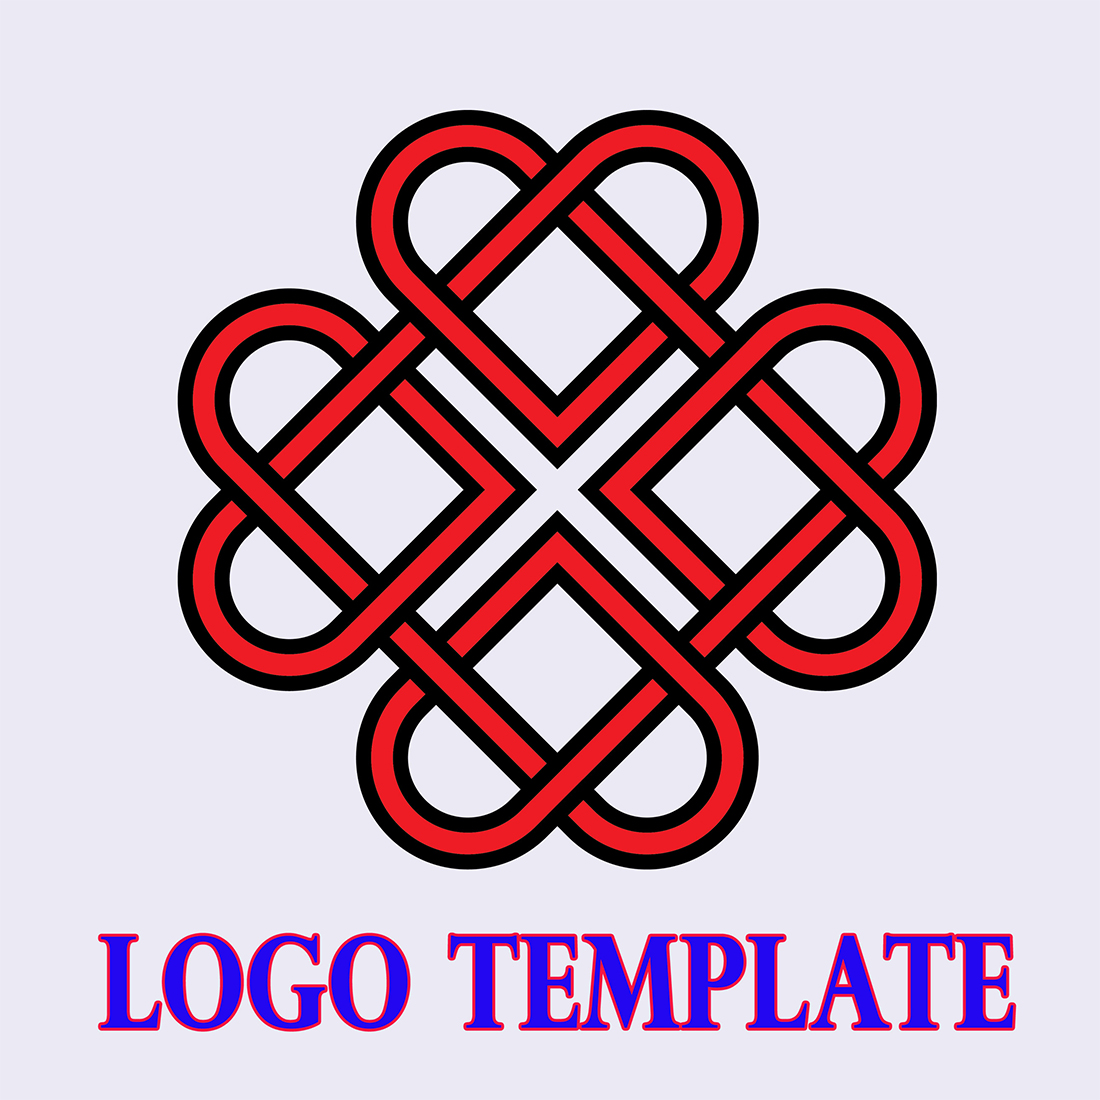 LOGO TEMPLATE cover image.